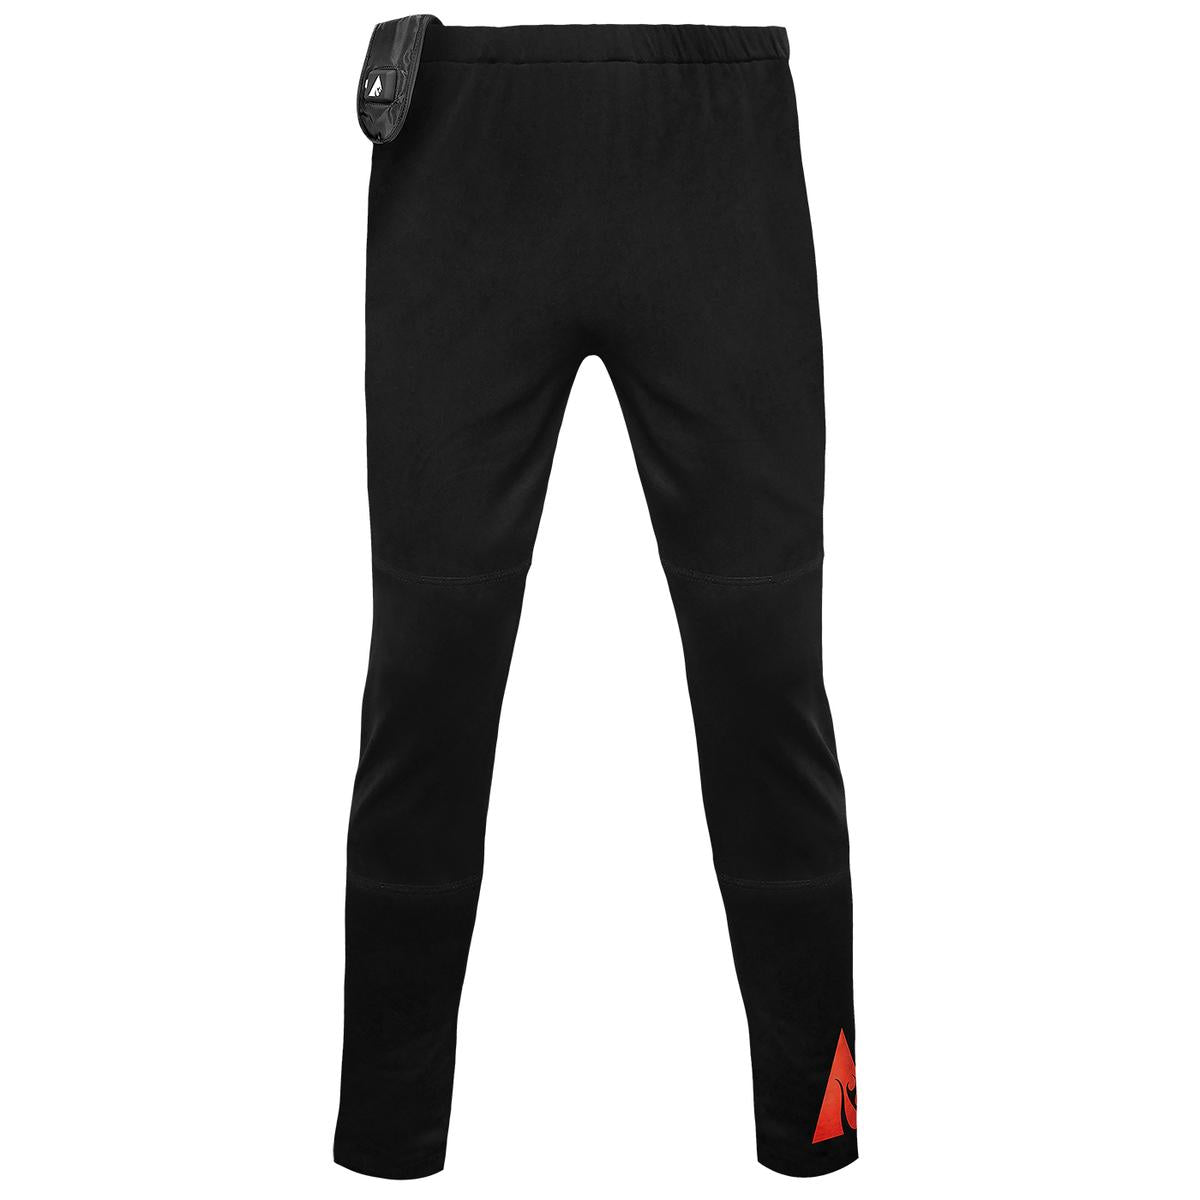 Heated Pants For Men Women Electric Warming Heating Pants Leggings  Lightweight USB Rechargeable Heating Trousers Winter Skiing